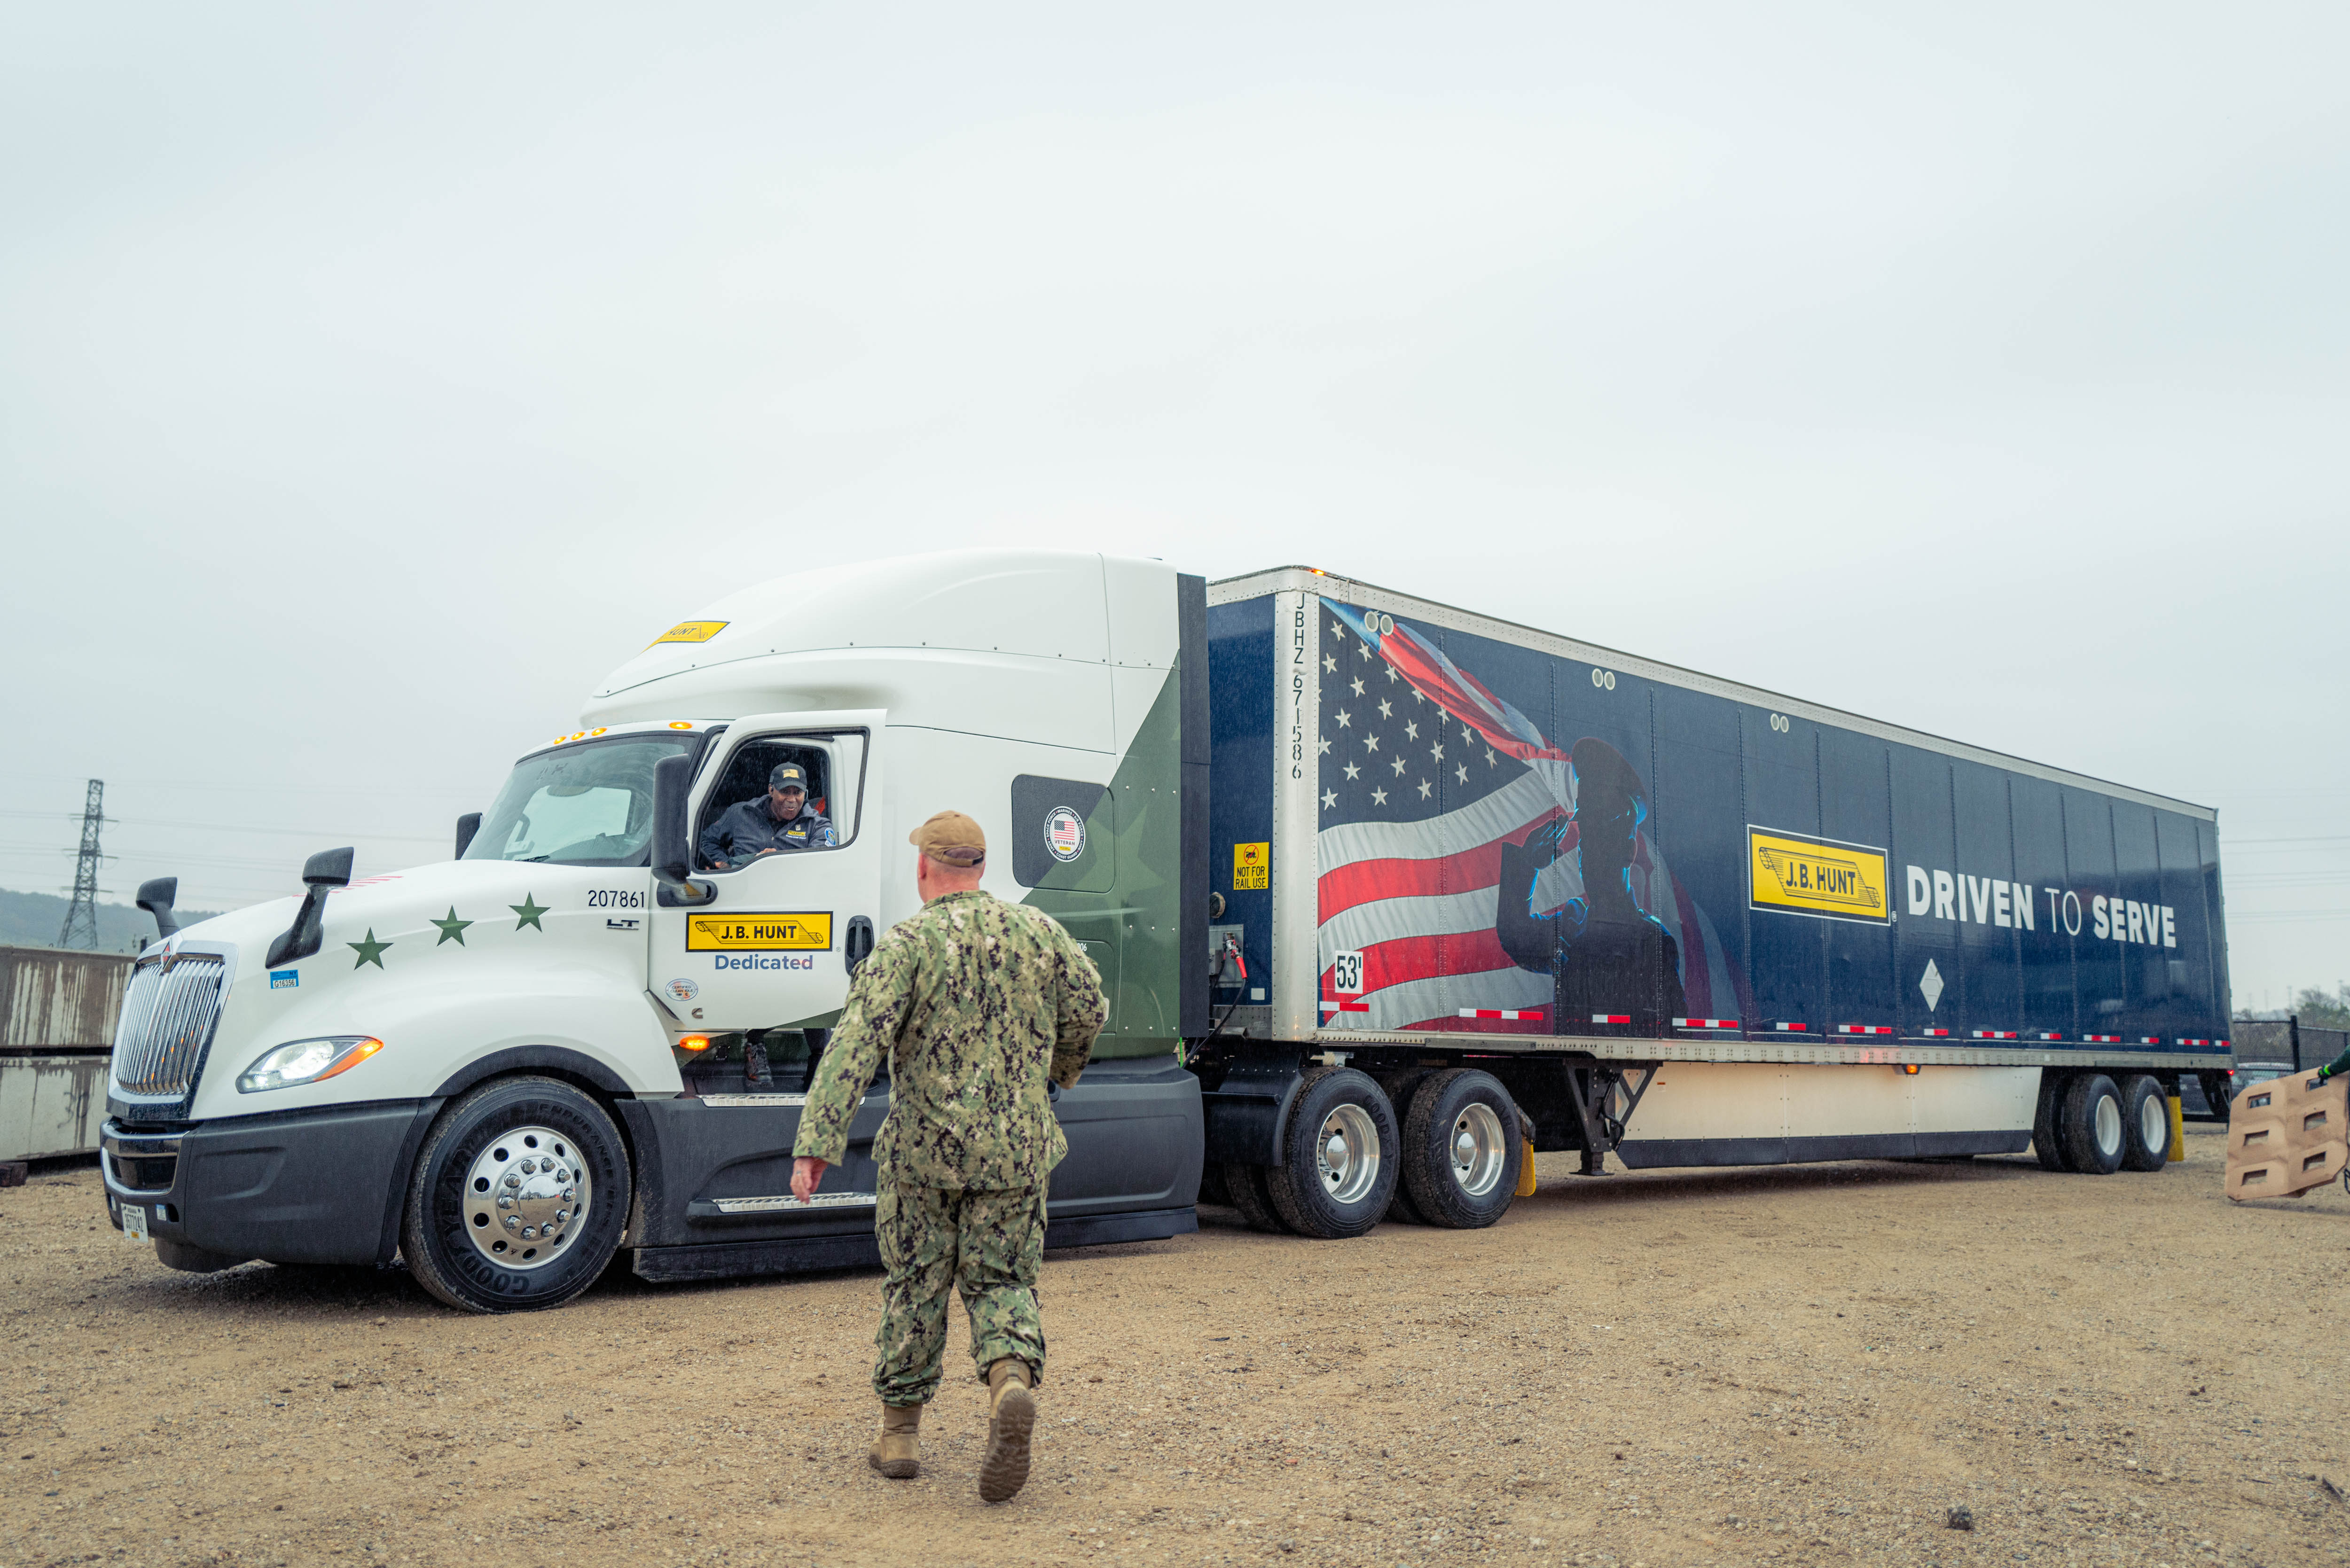 J.B. Hunt truck driver arrives to deliver a load of wreaths at the Dallas-Fort Worth National Cemetery for the 2023 Wreaths Across America Day.